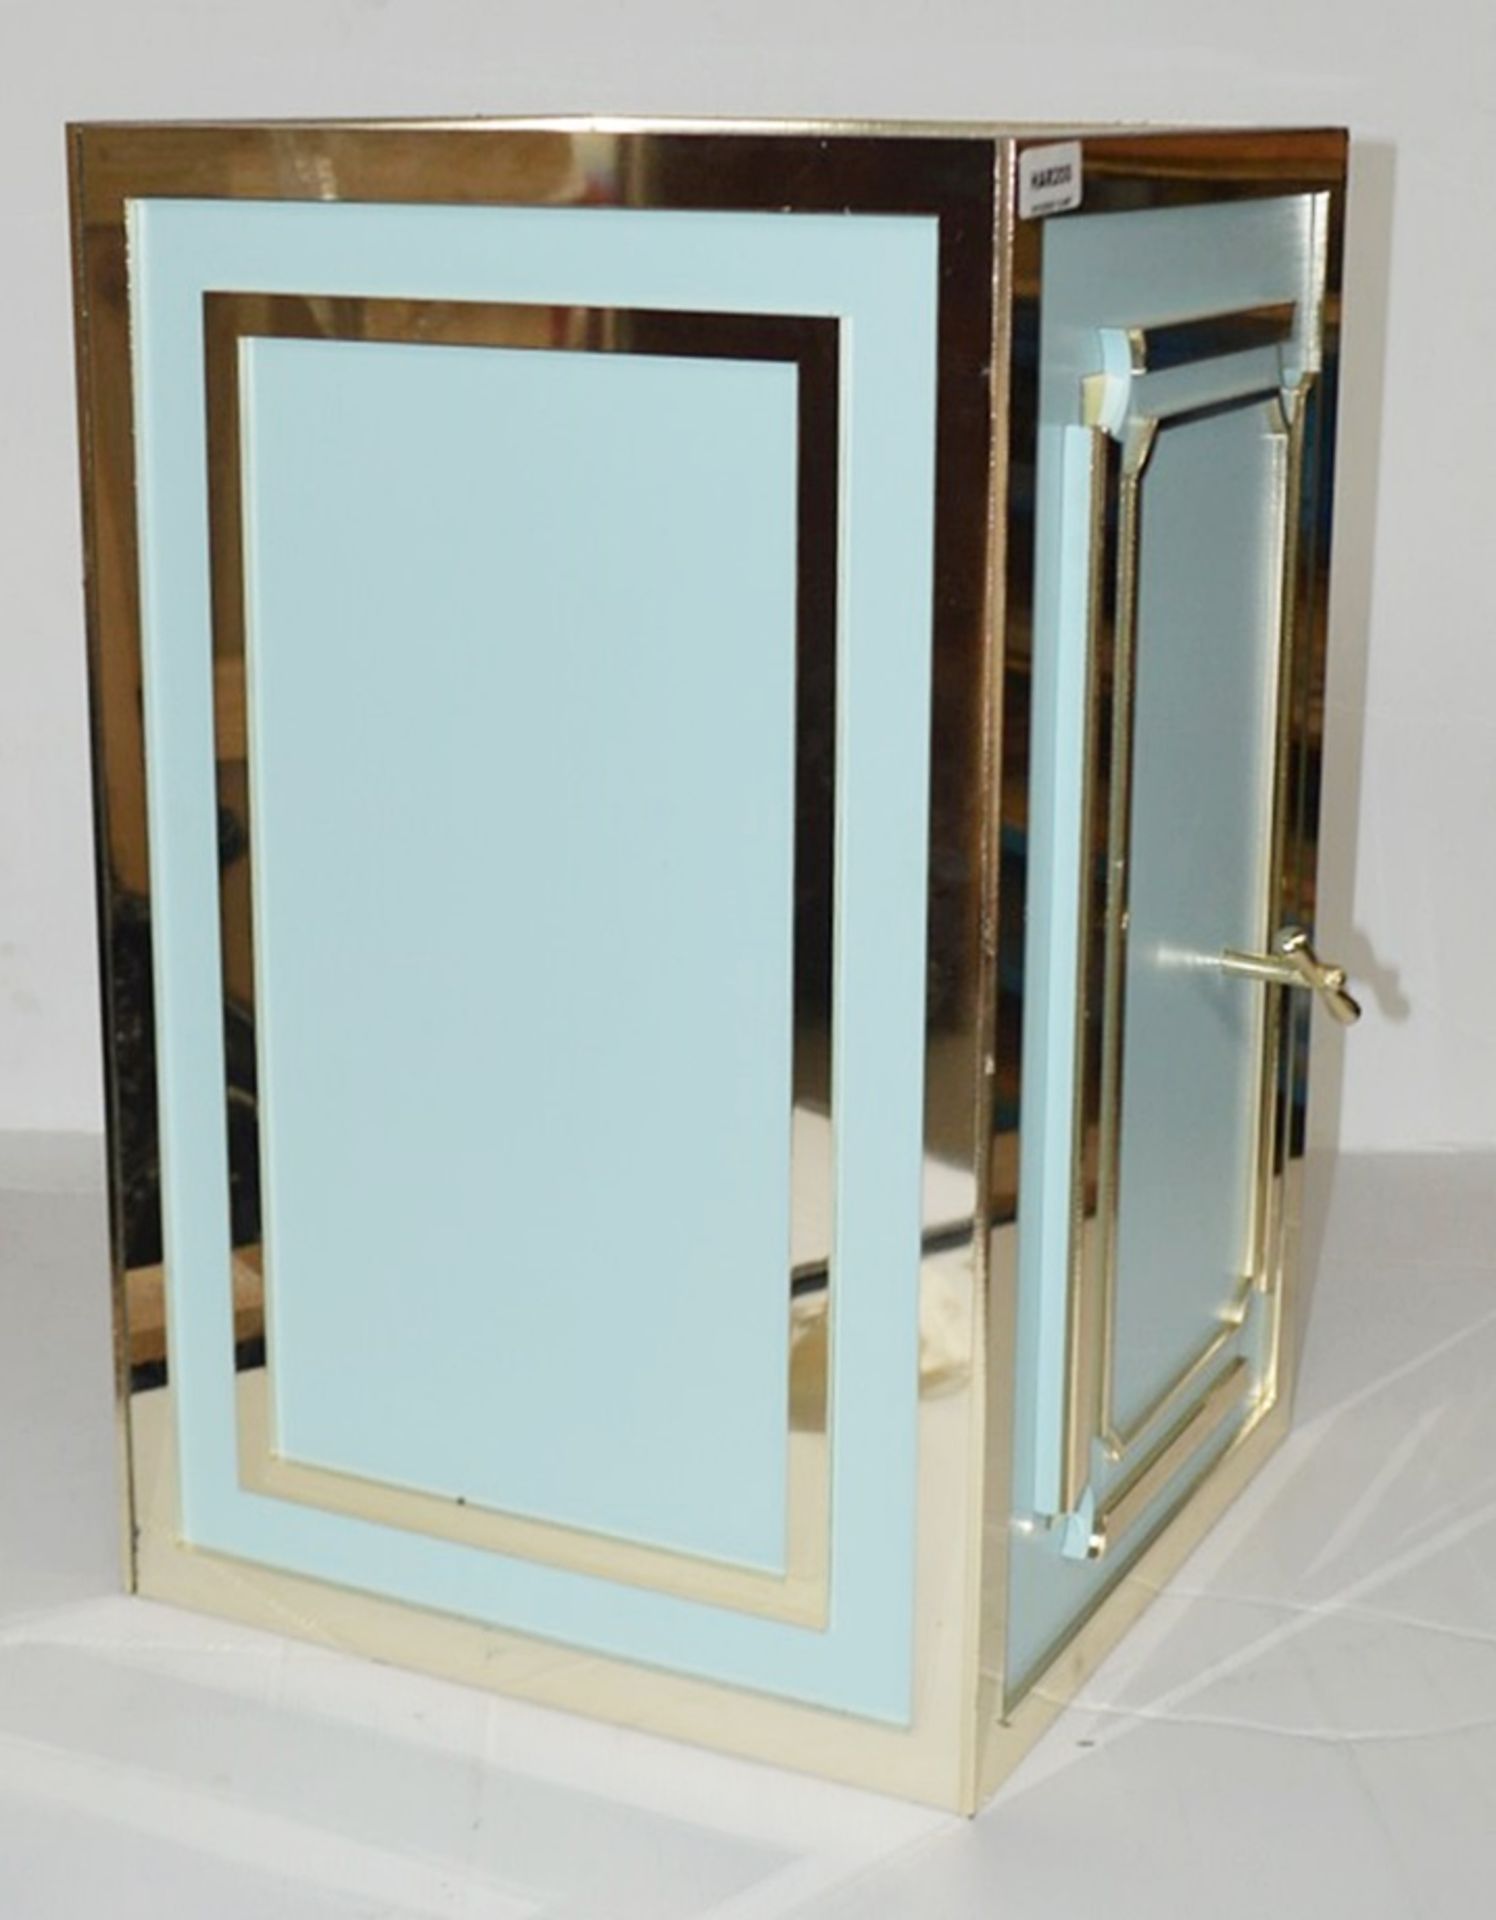 1 x Bank Vault Safe-style Shop Display Dummy Prop In Tiffany Blue With Gold Tinted Mirror Decoration - Image 2 of 3